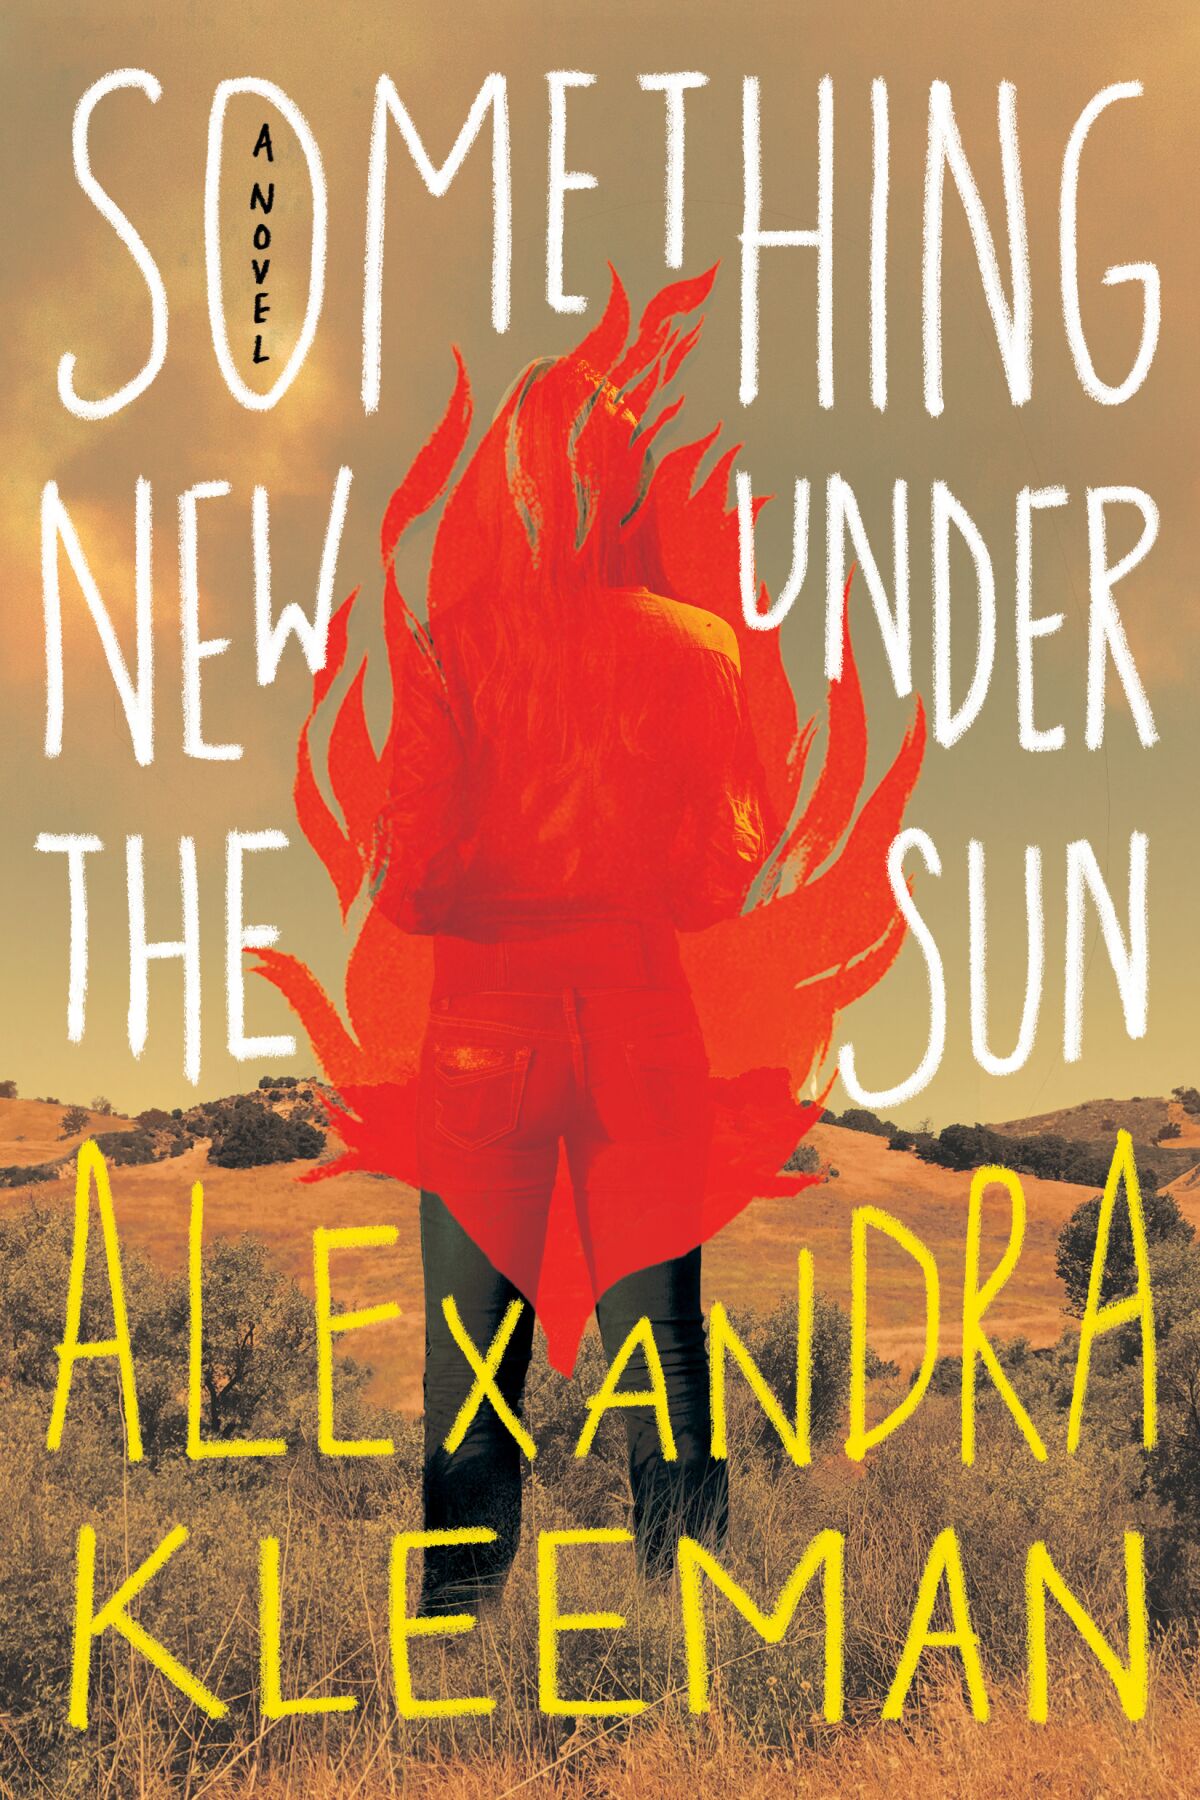 A person on fire in a field on the cover of "Something New Under the Sun," by Alexandra Kleeman.